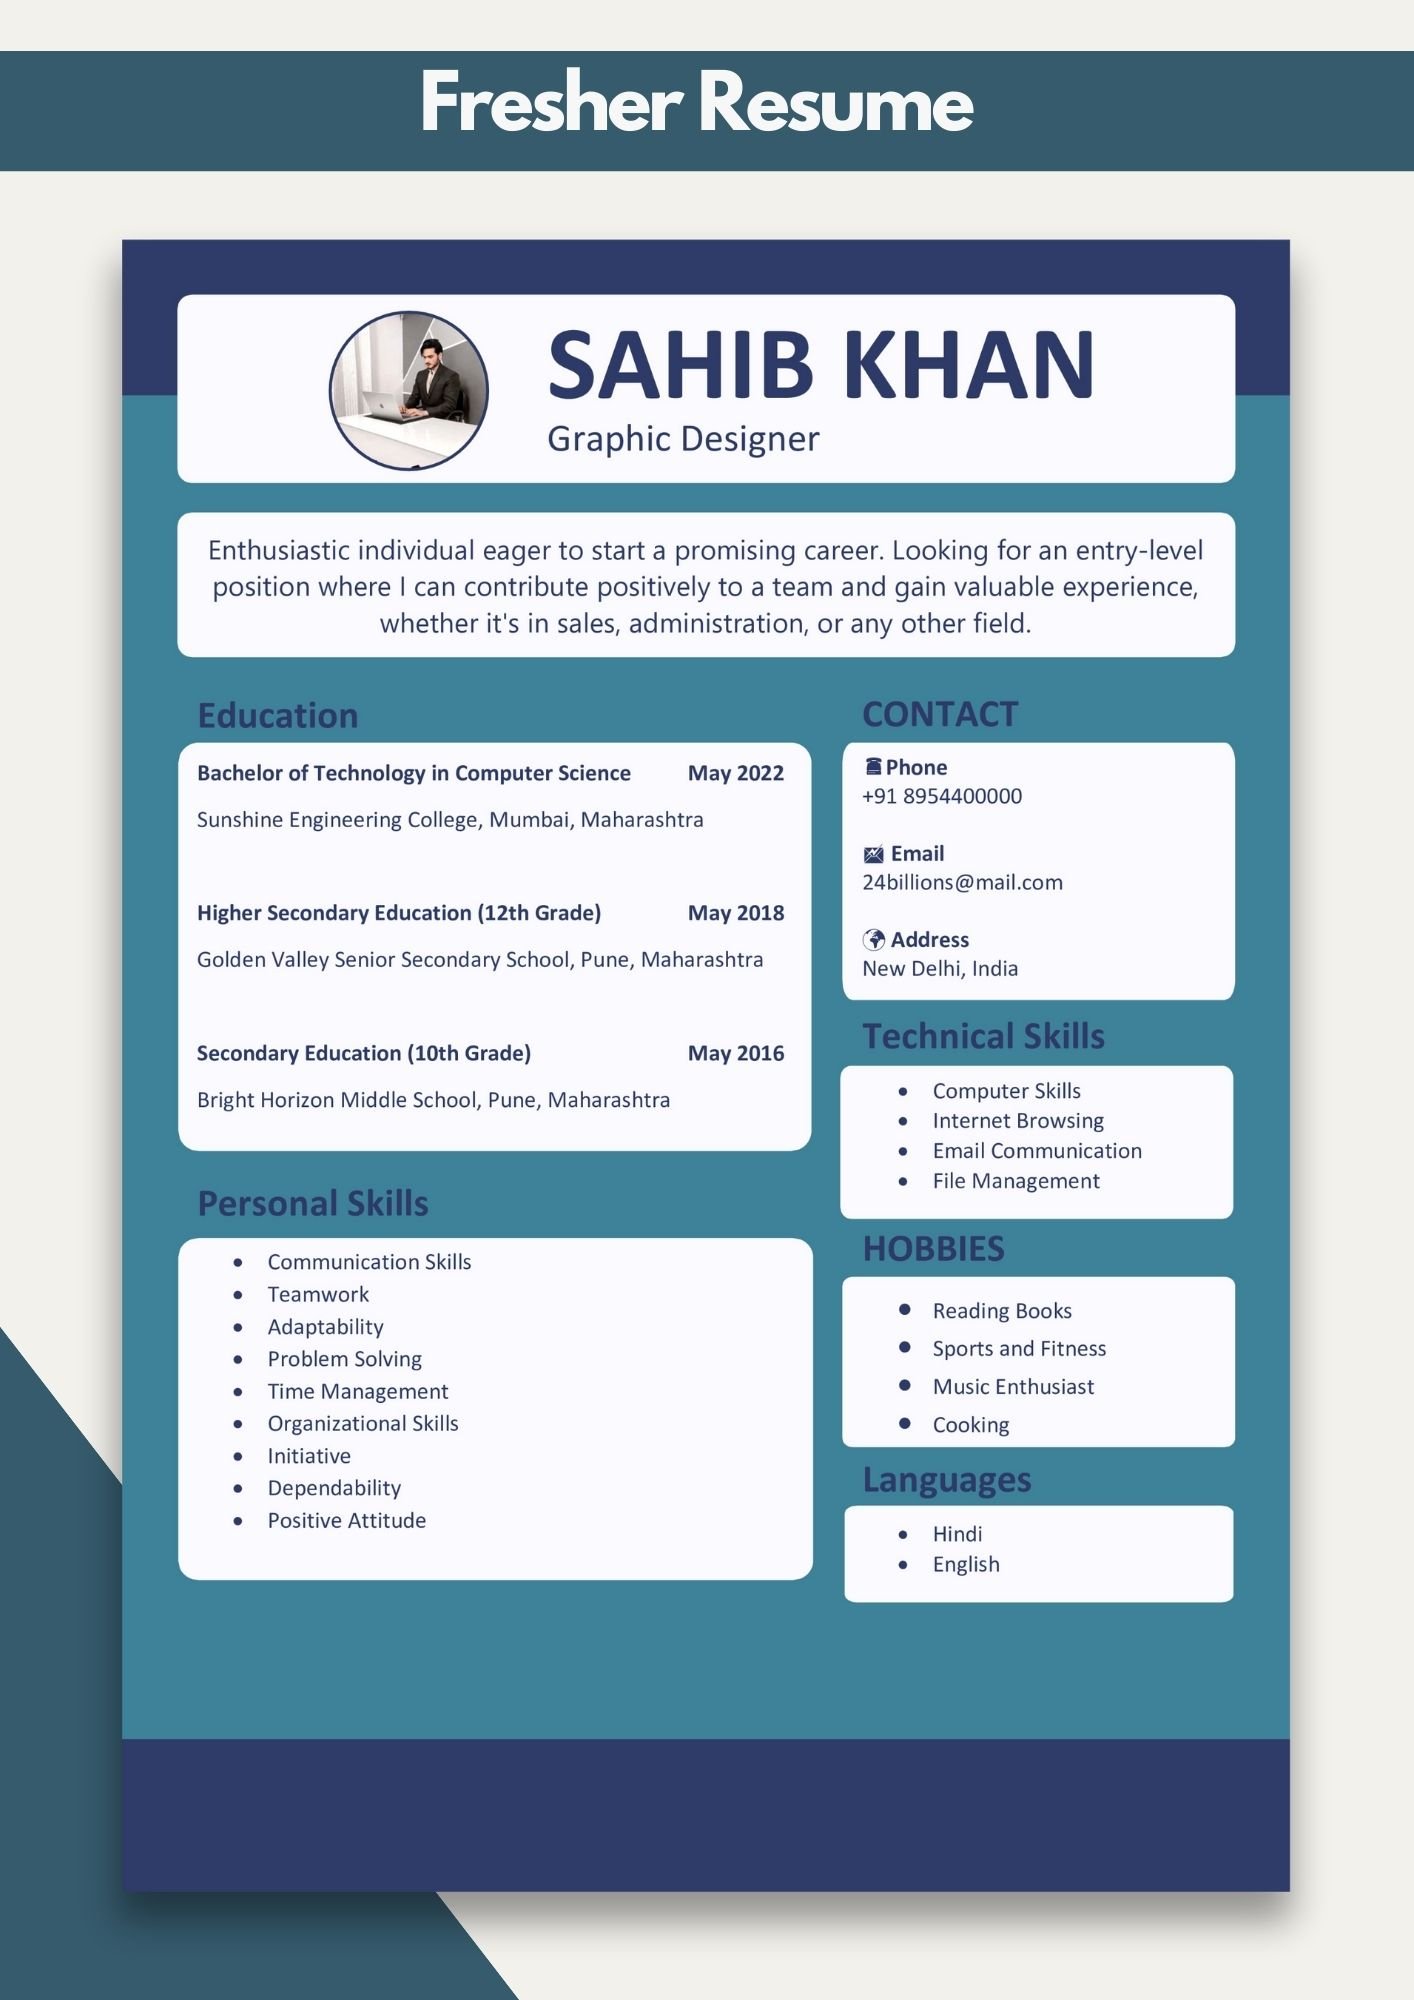 Sample Resume Templates for Freshers - Word & Pdf